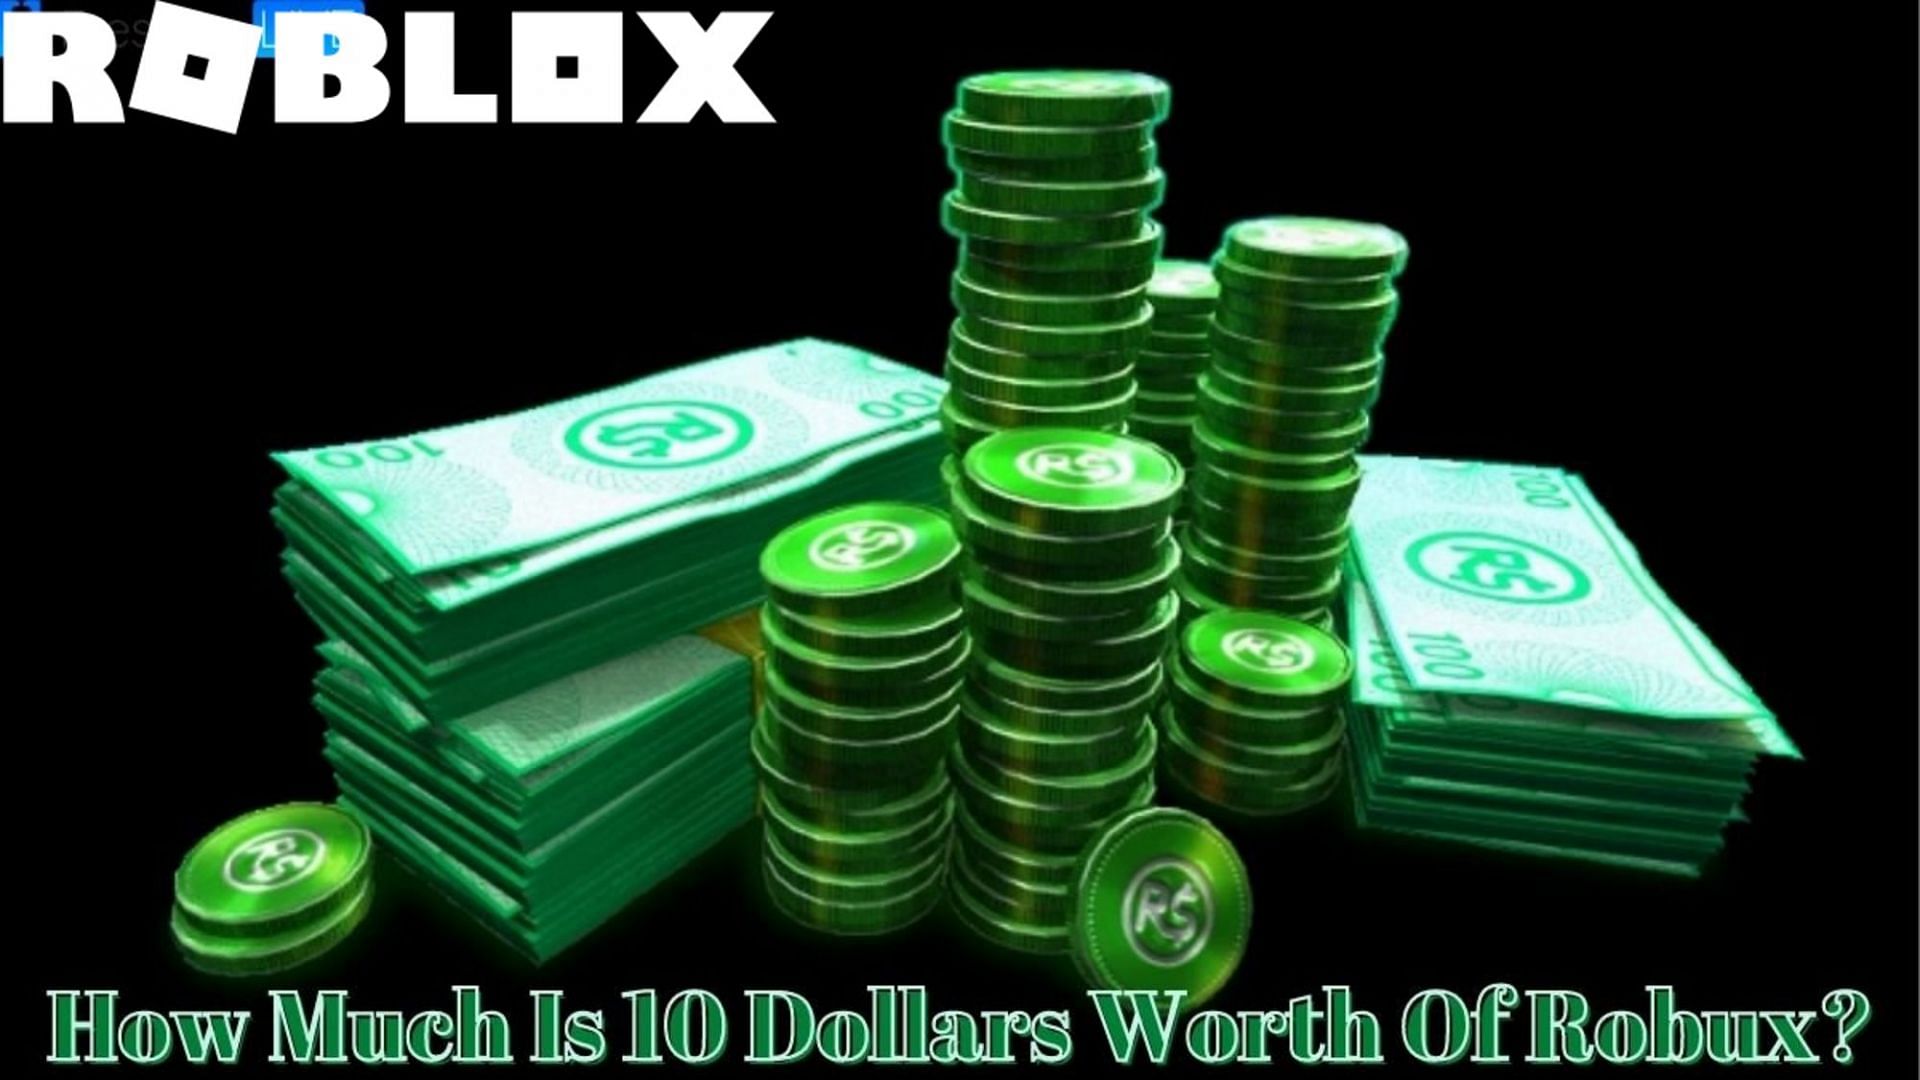 Worth of Robux in terms of US Dollars in Roblox (Image via Roblox)